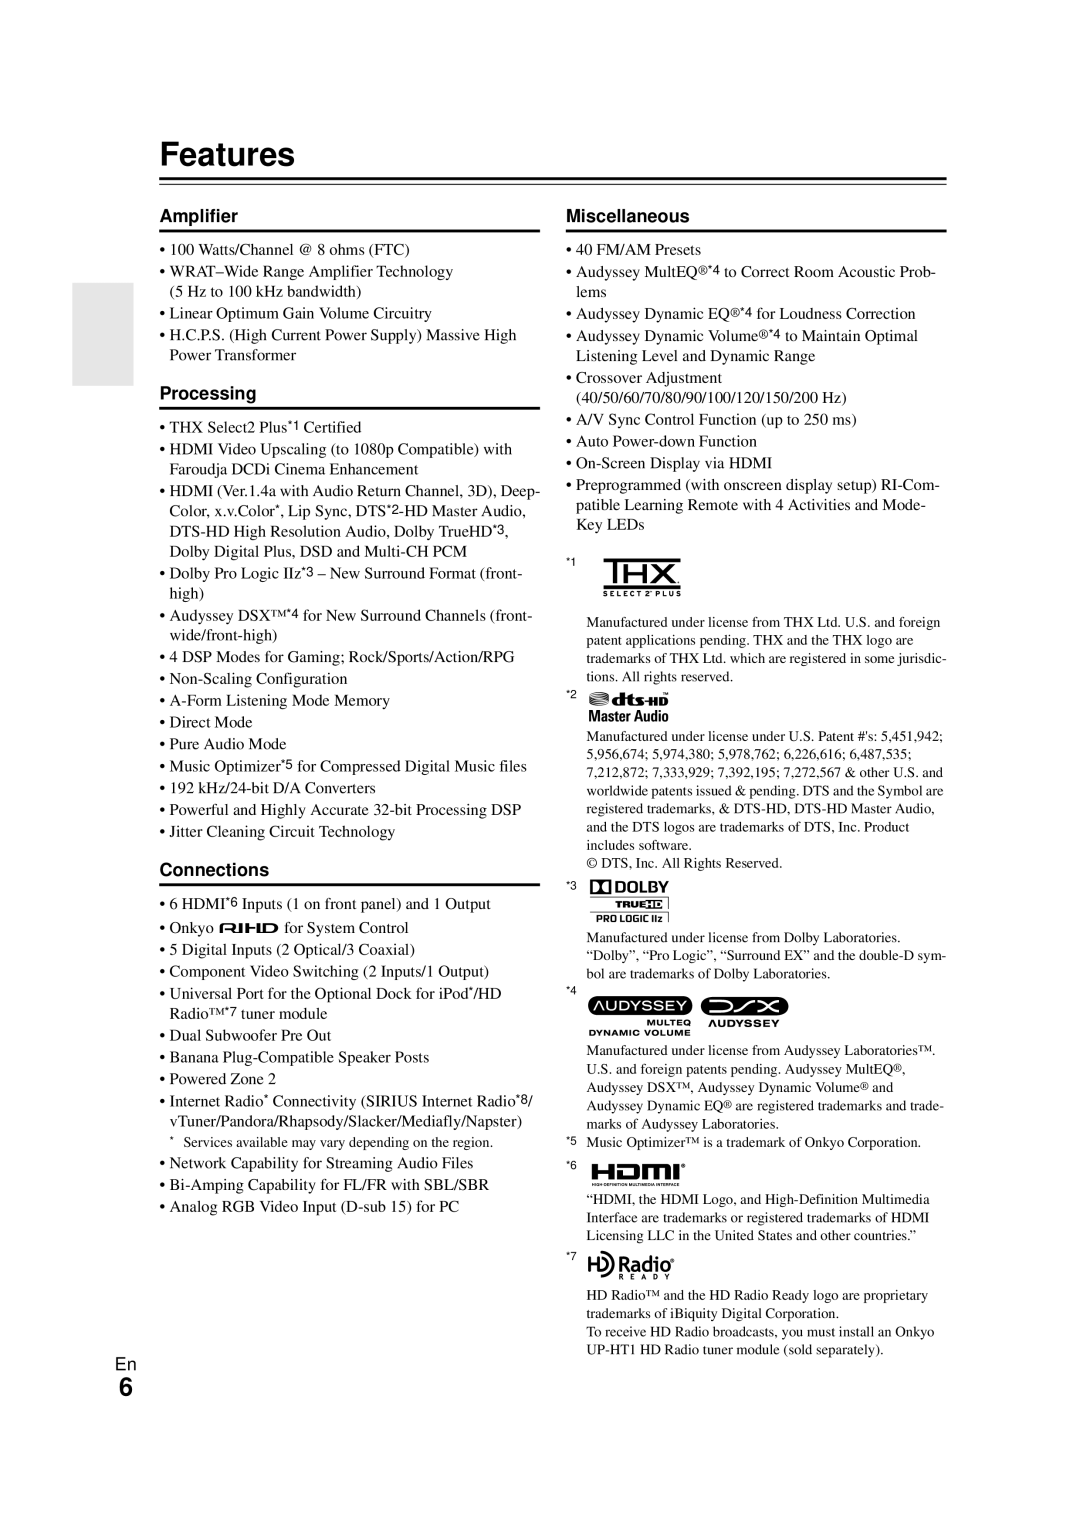 Onkyo HT-RC270 instruction manual Features, Amplifier, Processing, Miscellaneous, Connections 